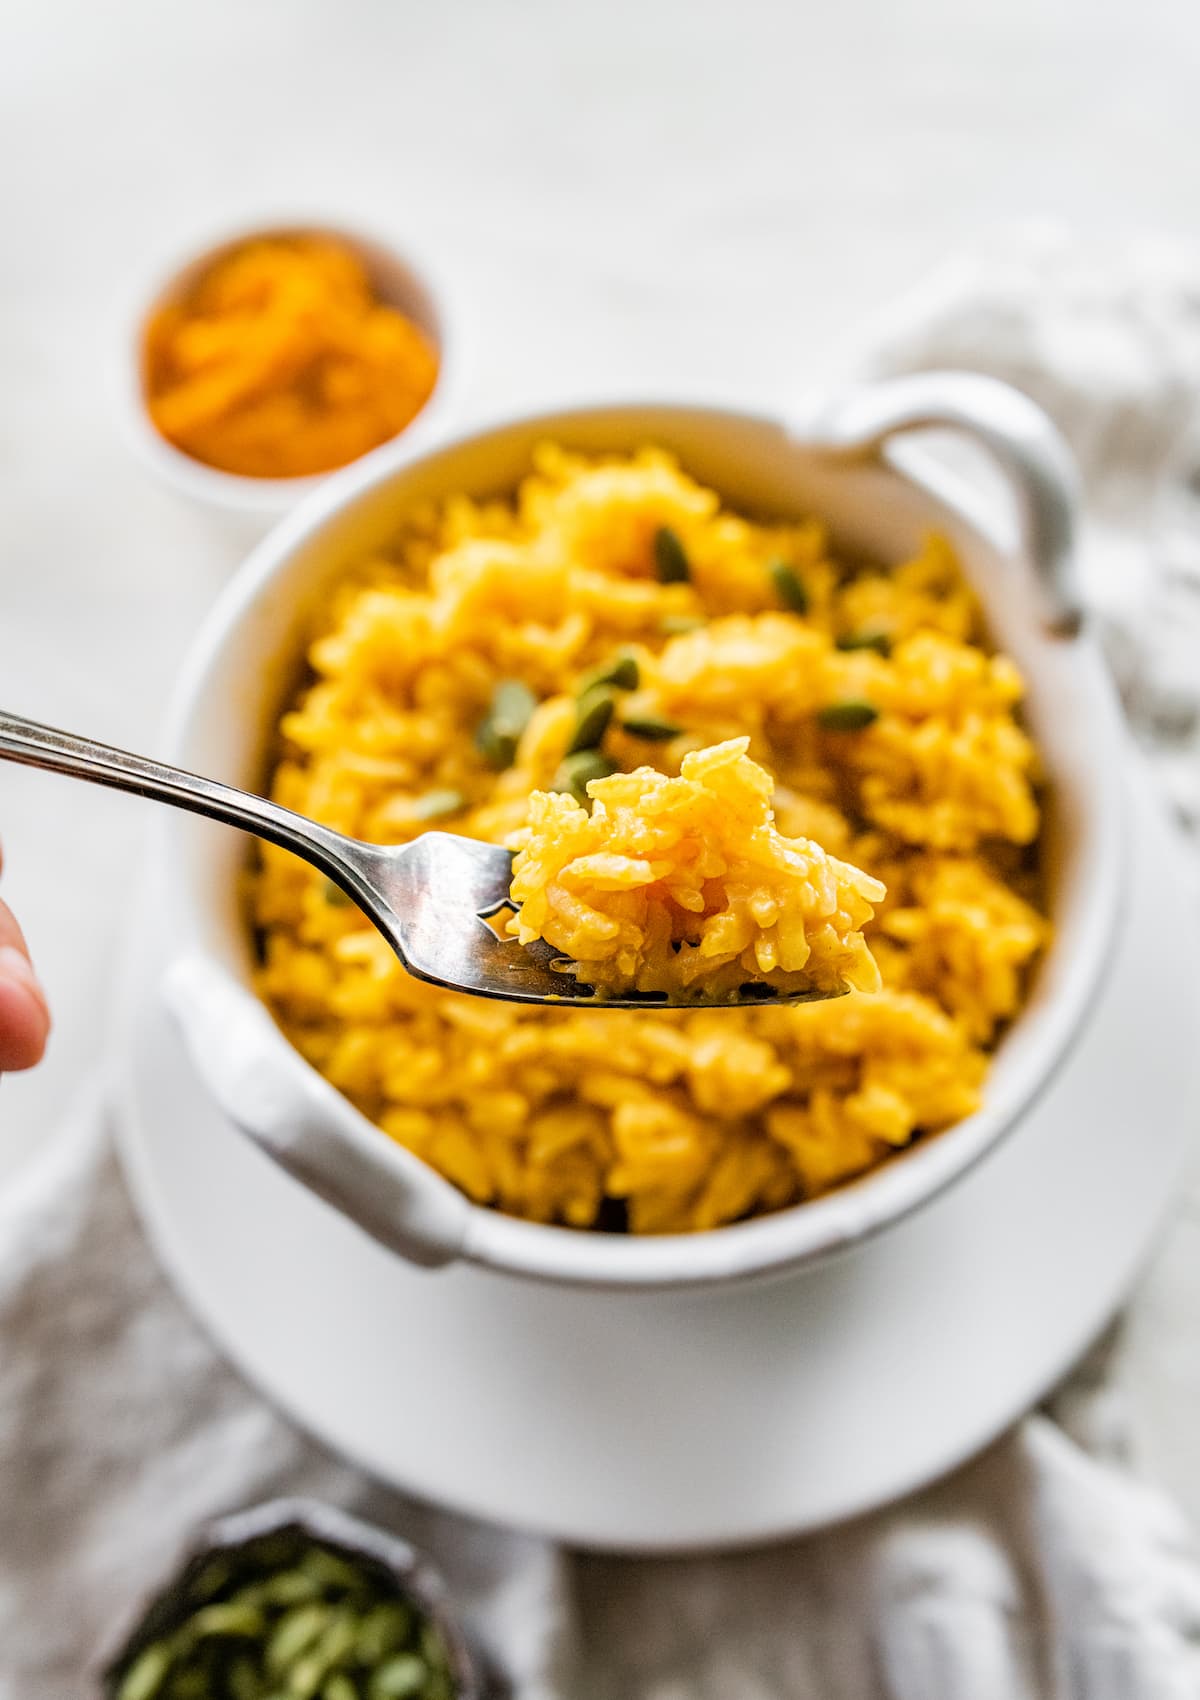 A fork holding a bite size portion of pumpkin rice over a small white bowl.